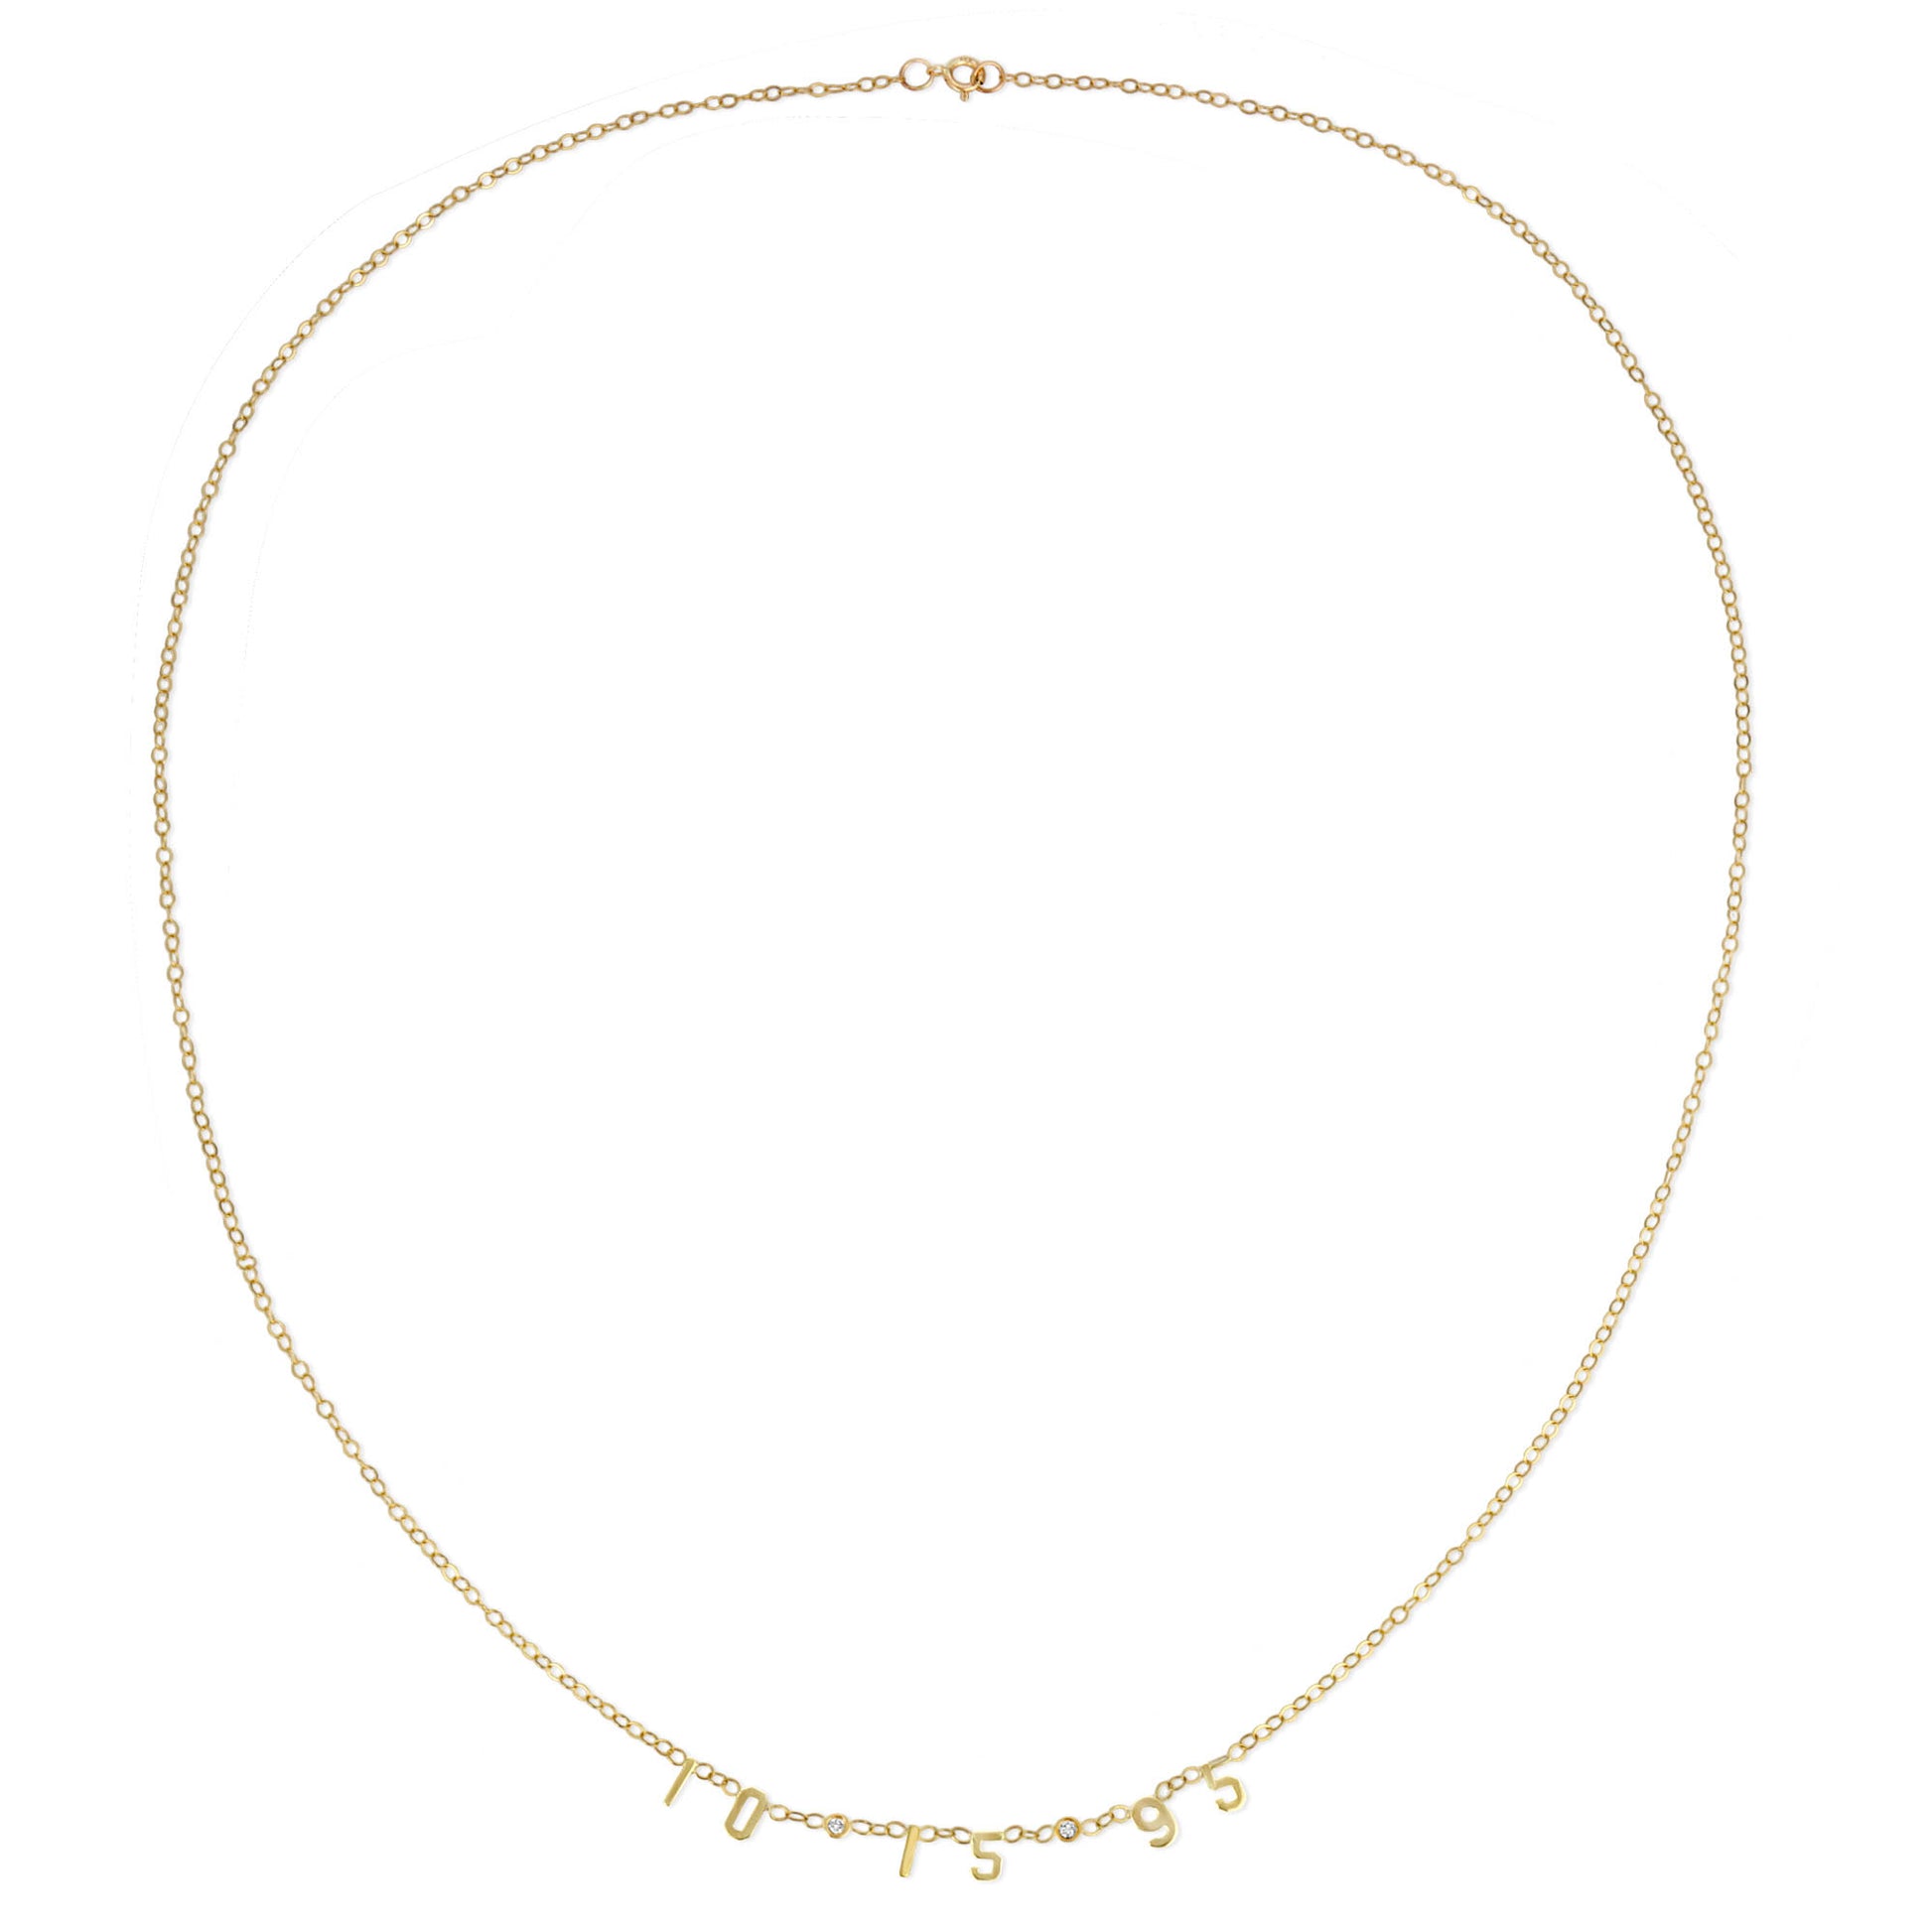 PERSONALIZED DATE NECKLACE WITH DIAMONDS - Danielle Morgan 